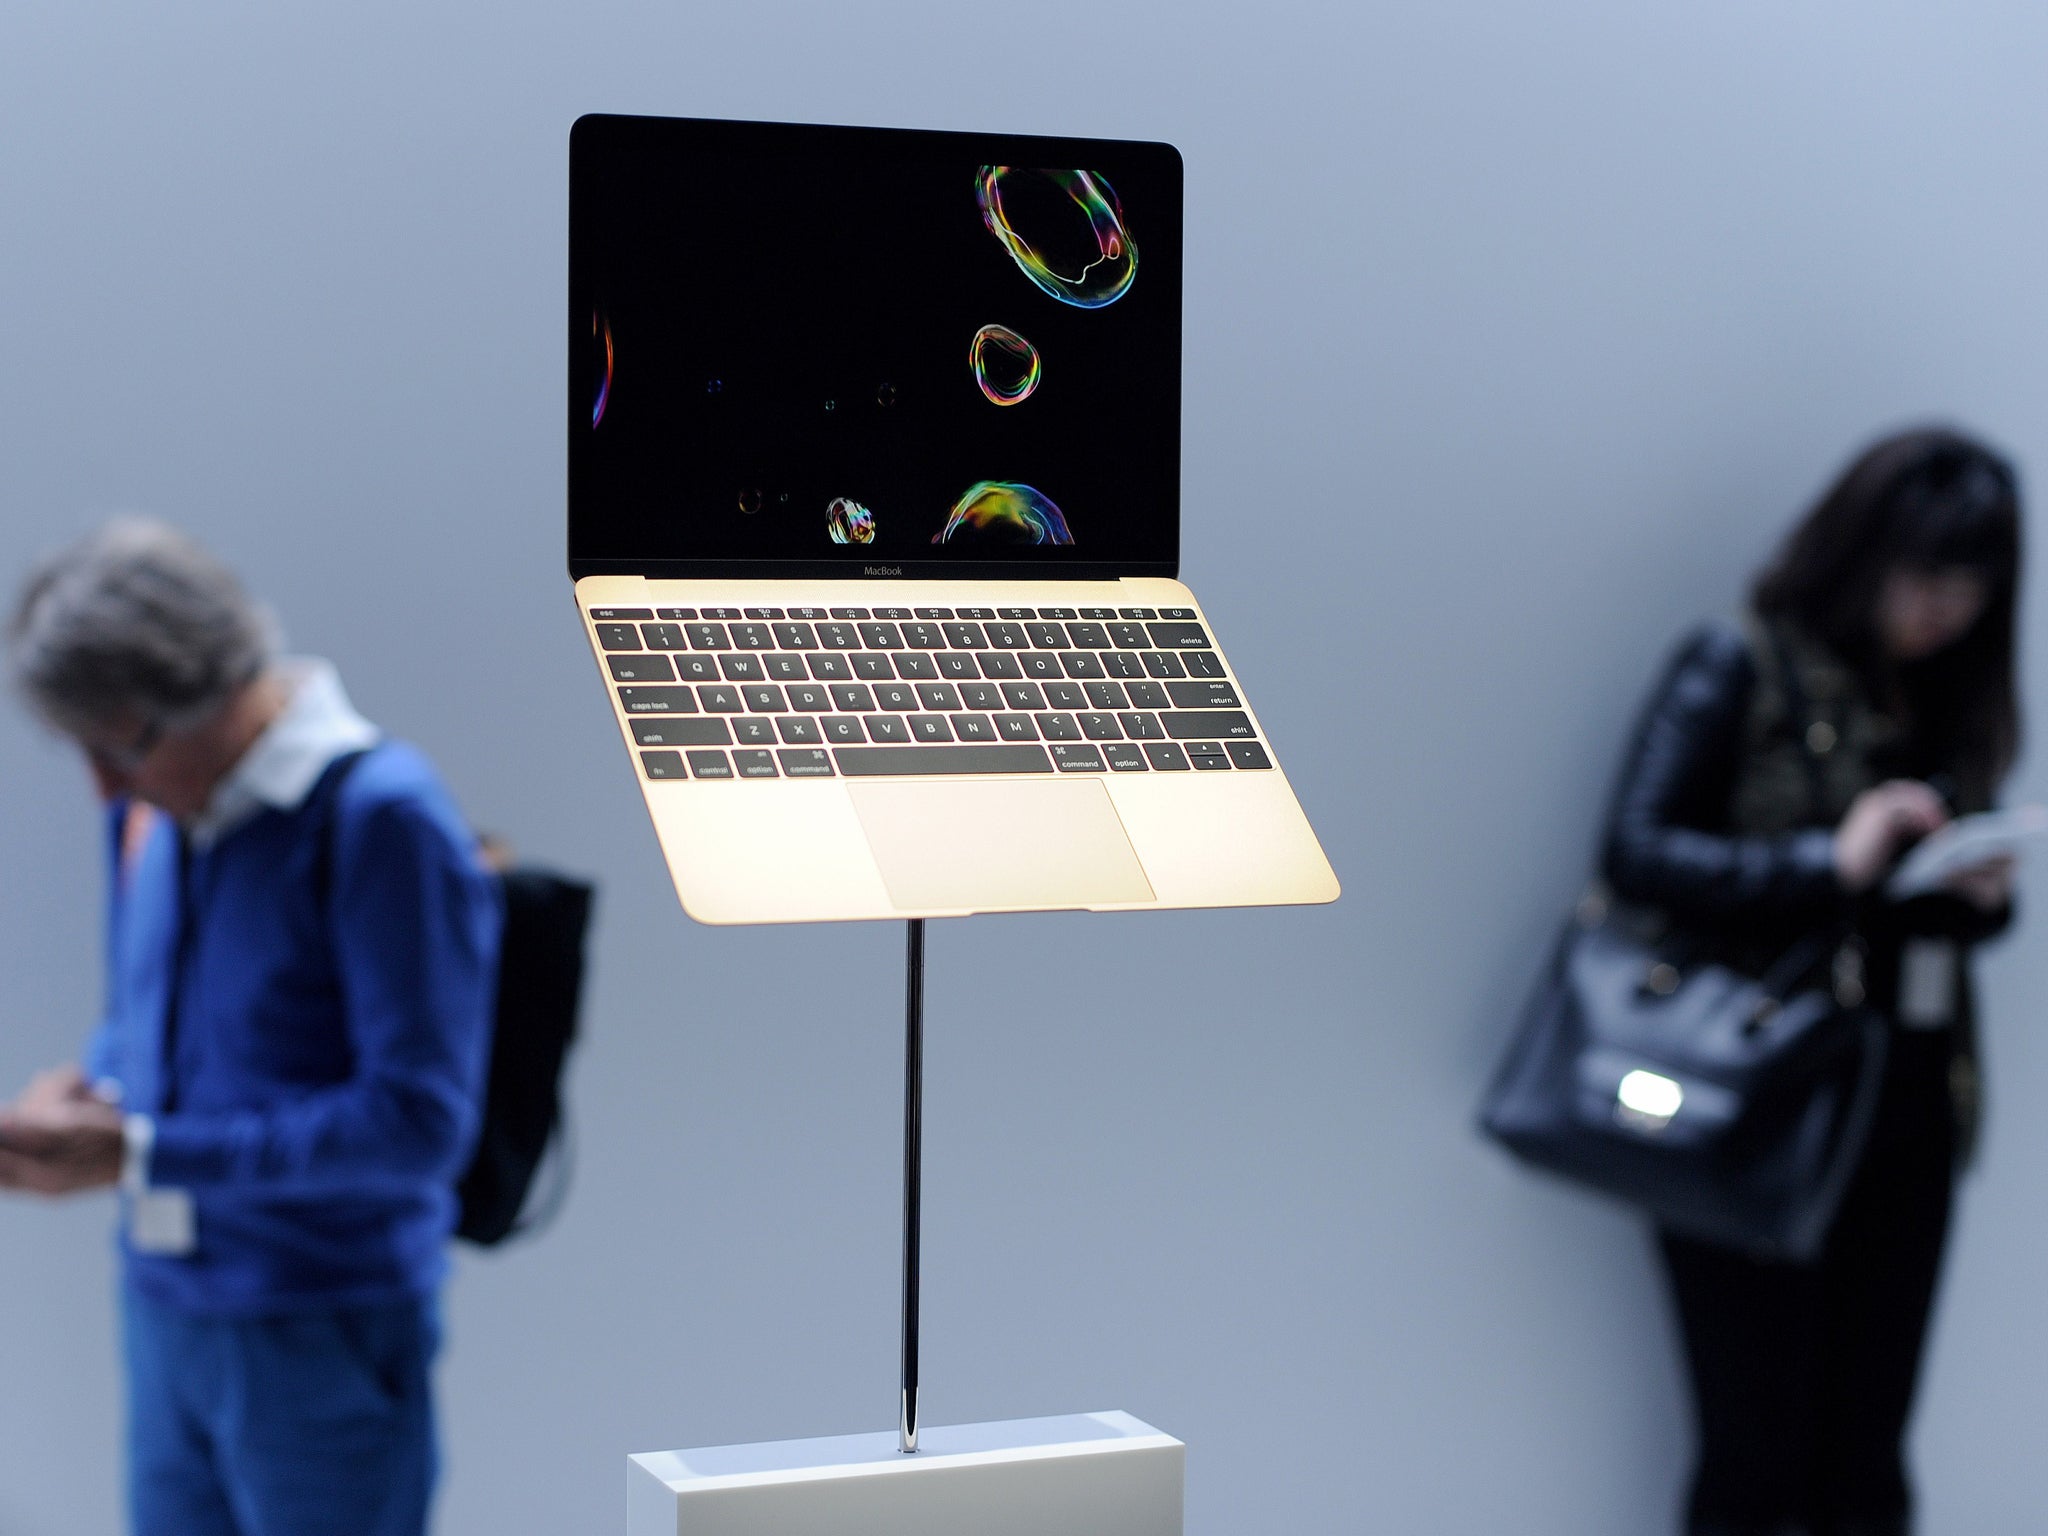 A new Macbook Pro is seen on display at an Apple media event in San Francisco, California on March 9, 2015